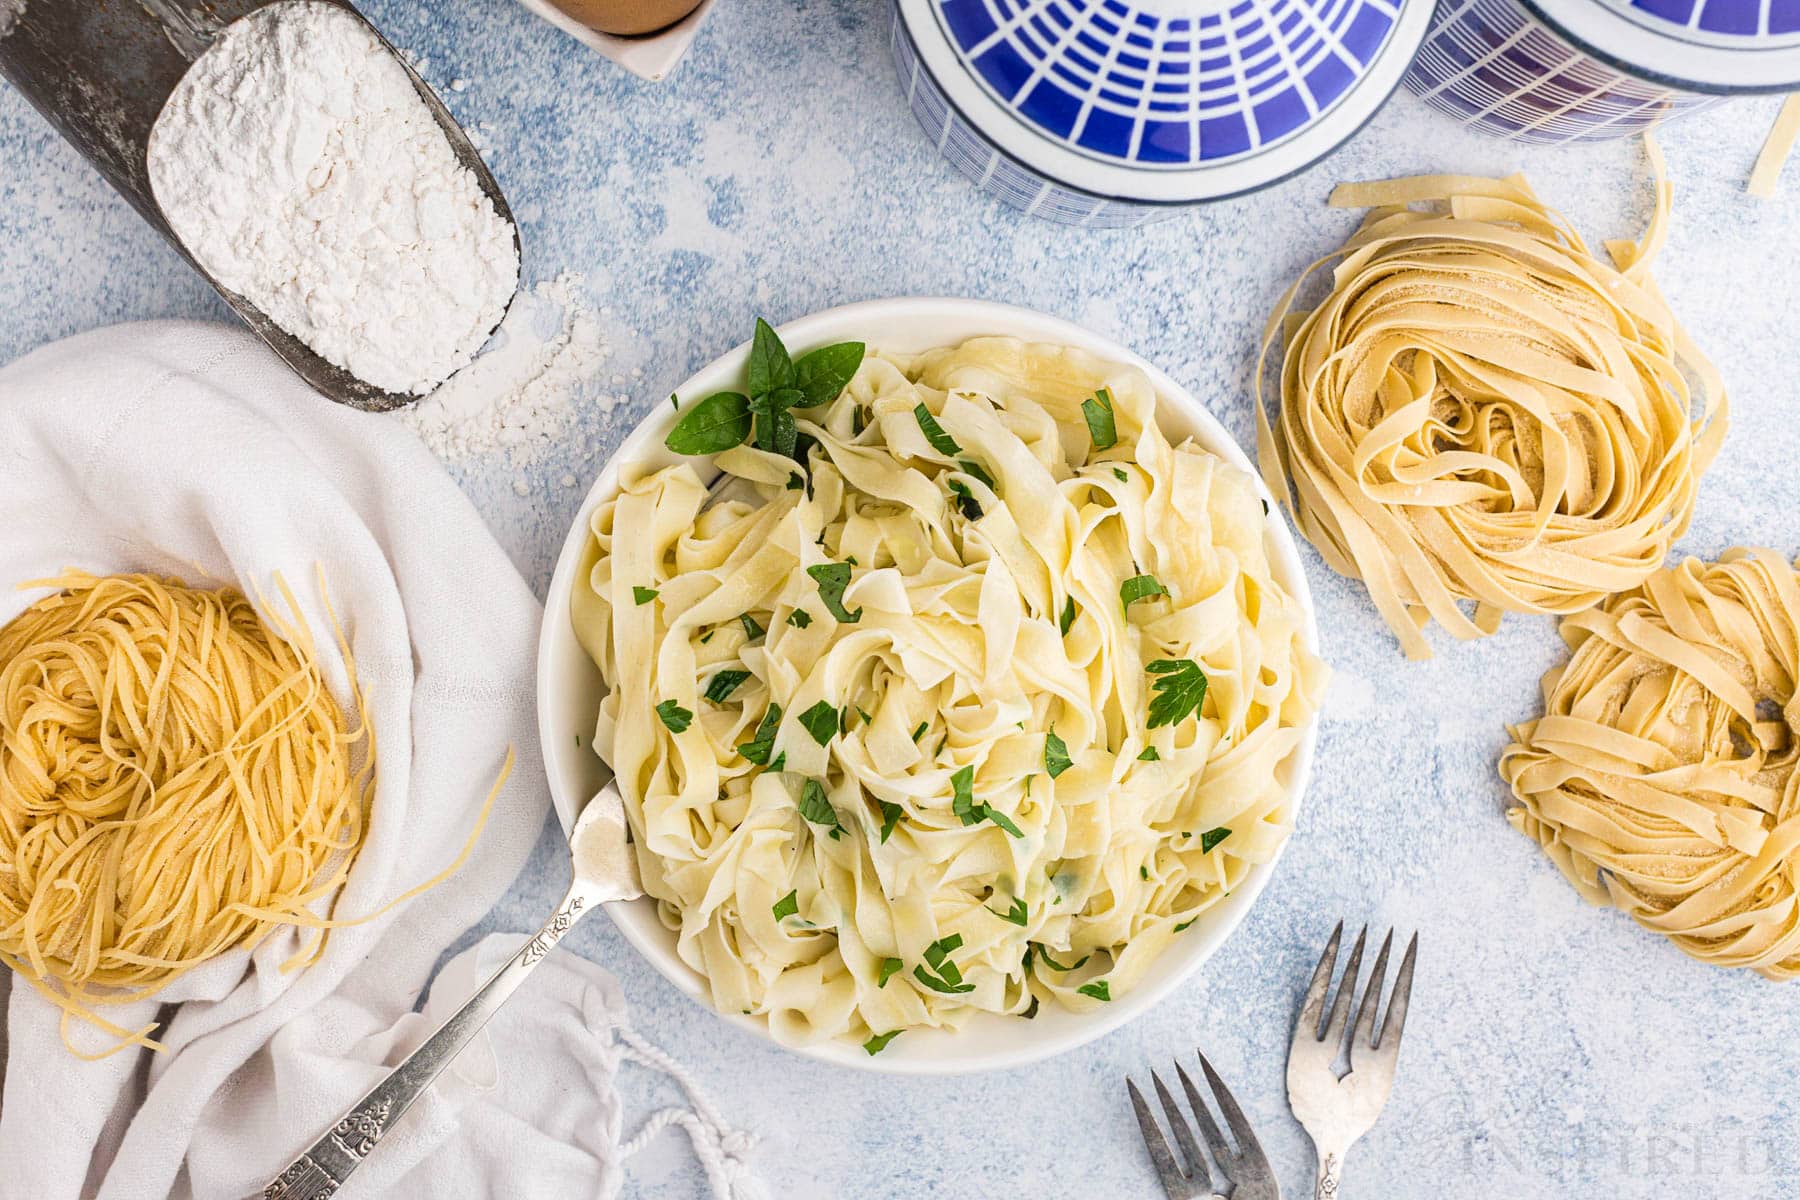 Overhead of bowl of cooked homemade pasta with fresh herbs and metal fork, two metal forks on the countertop, metal measuring spoon with flour, cluster of uncooked homemade pasta, white linen, blue decorative ingredient jars, on a marble countertop.